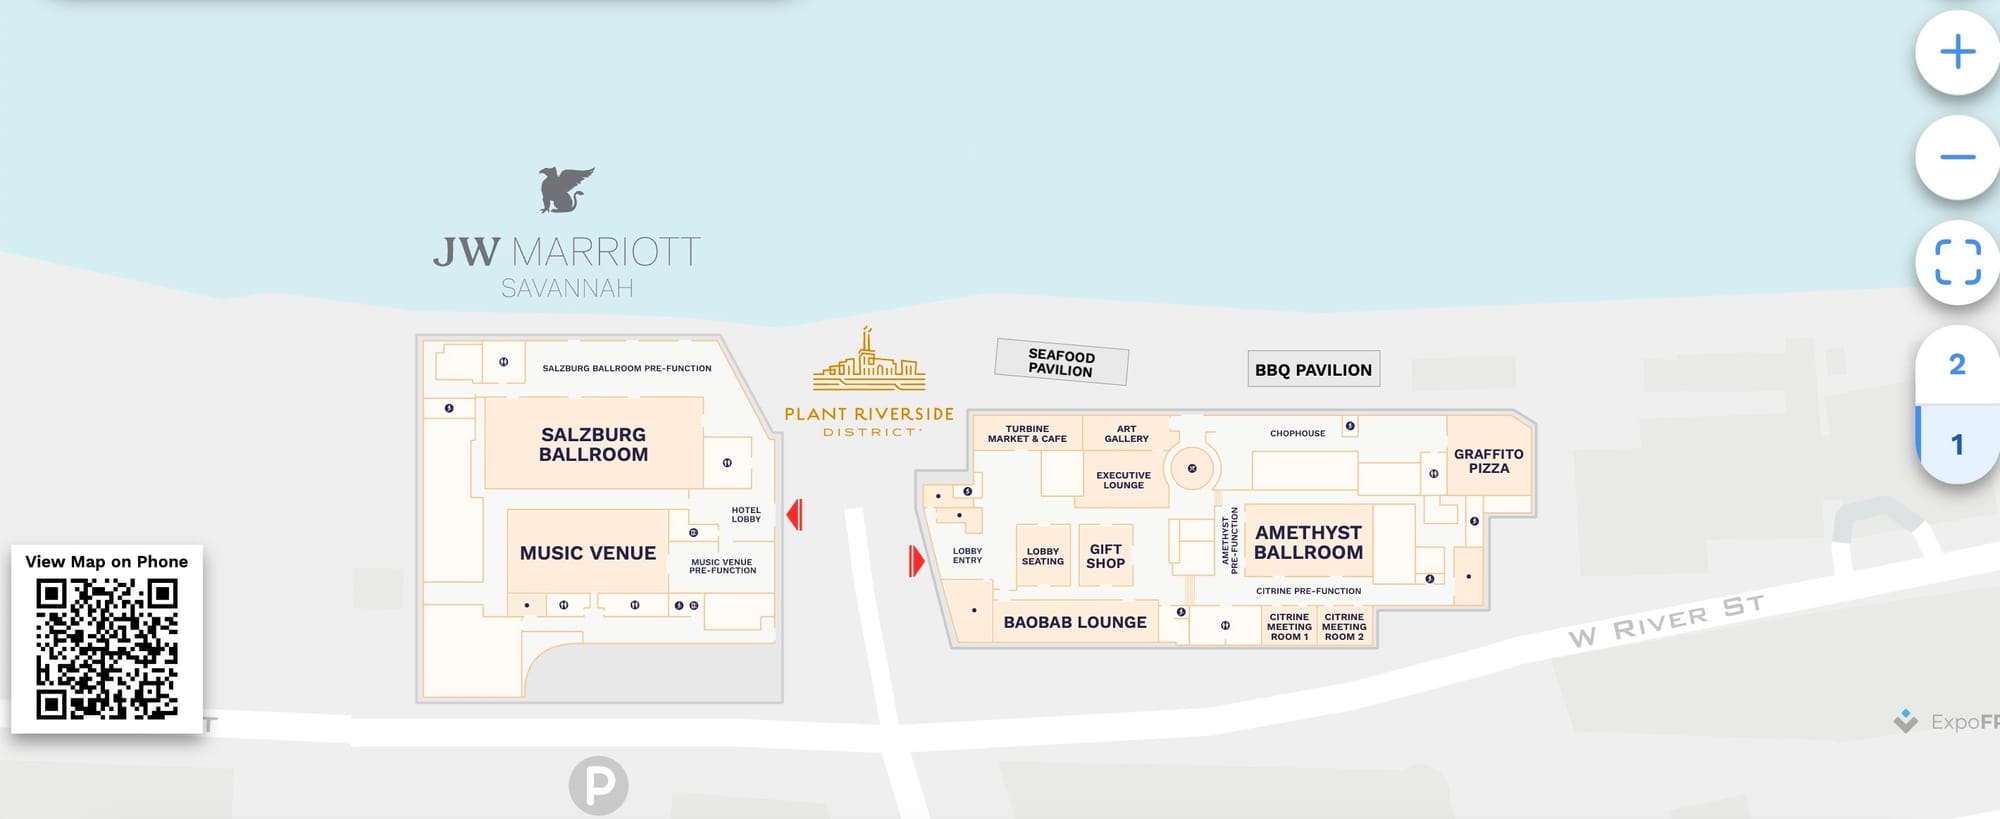 Simplifying Navigation with Interactive Floor Plans on Kiosks